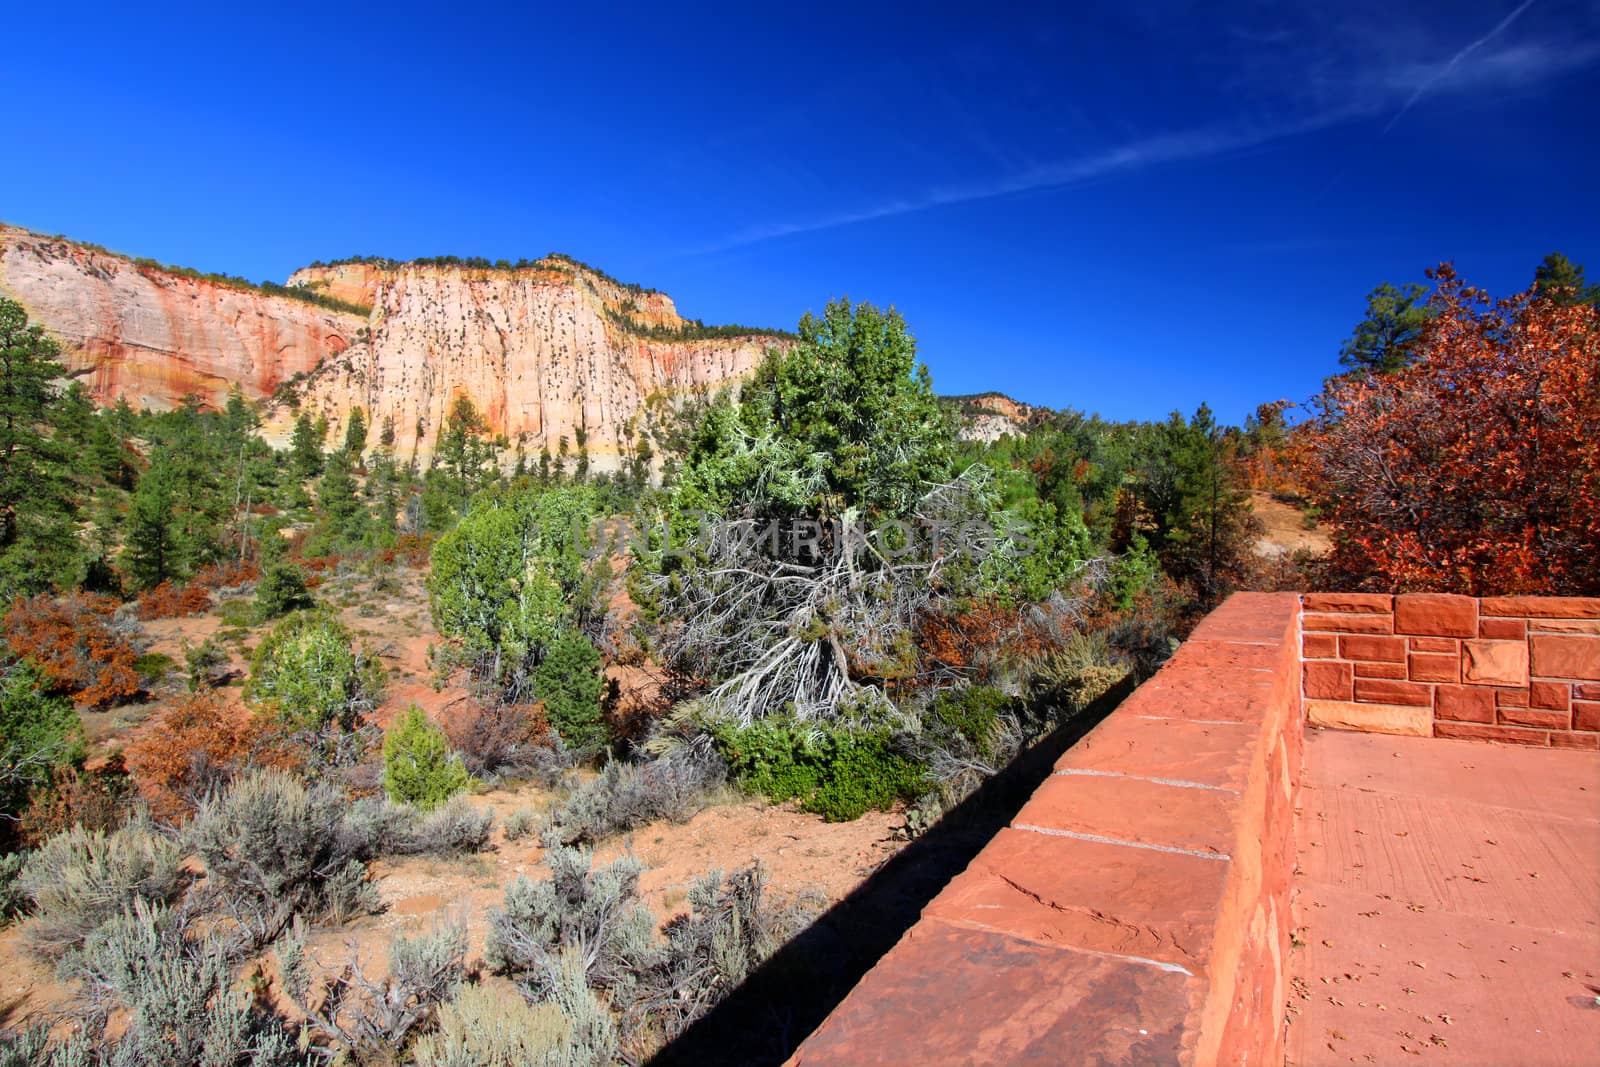 Scenic overlook at Zion National Park in Utah.